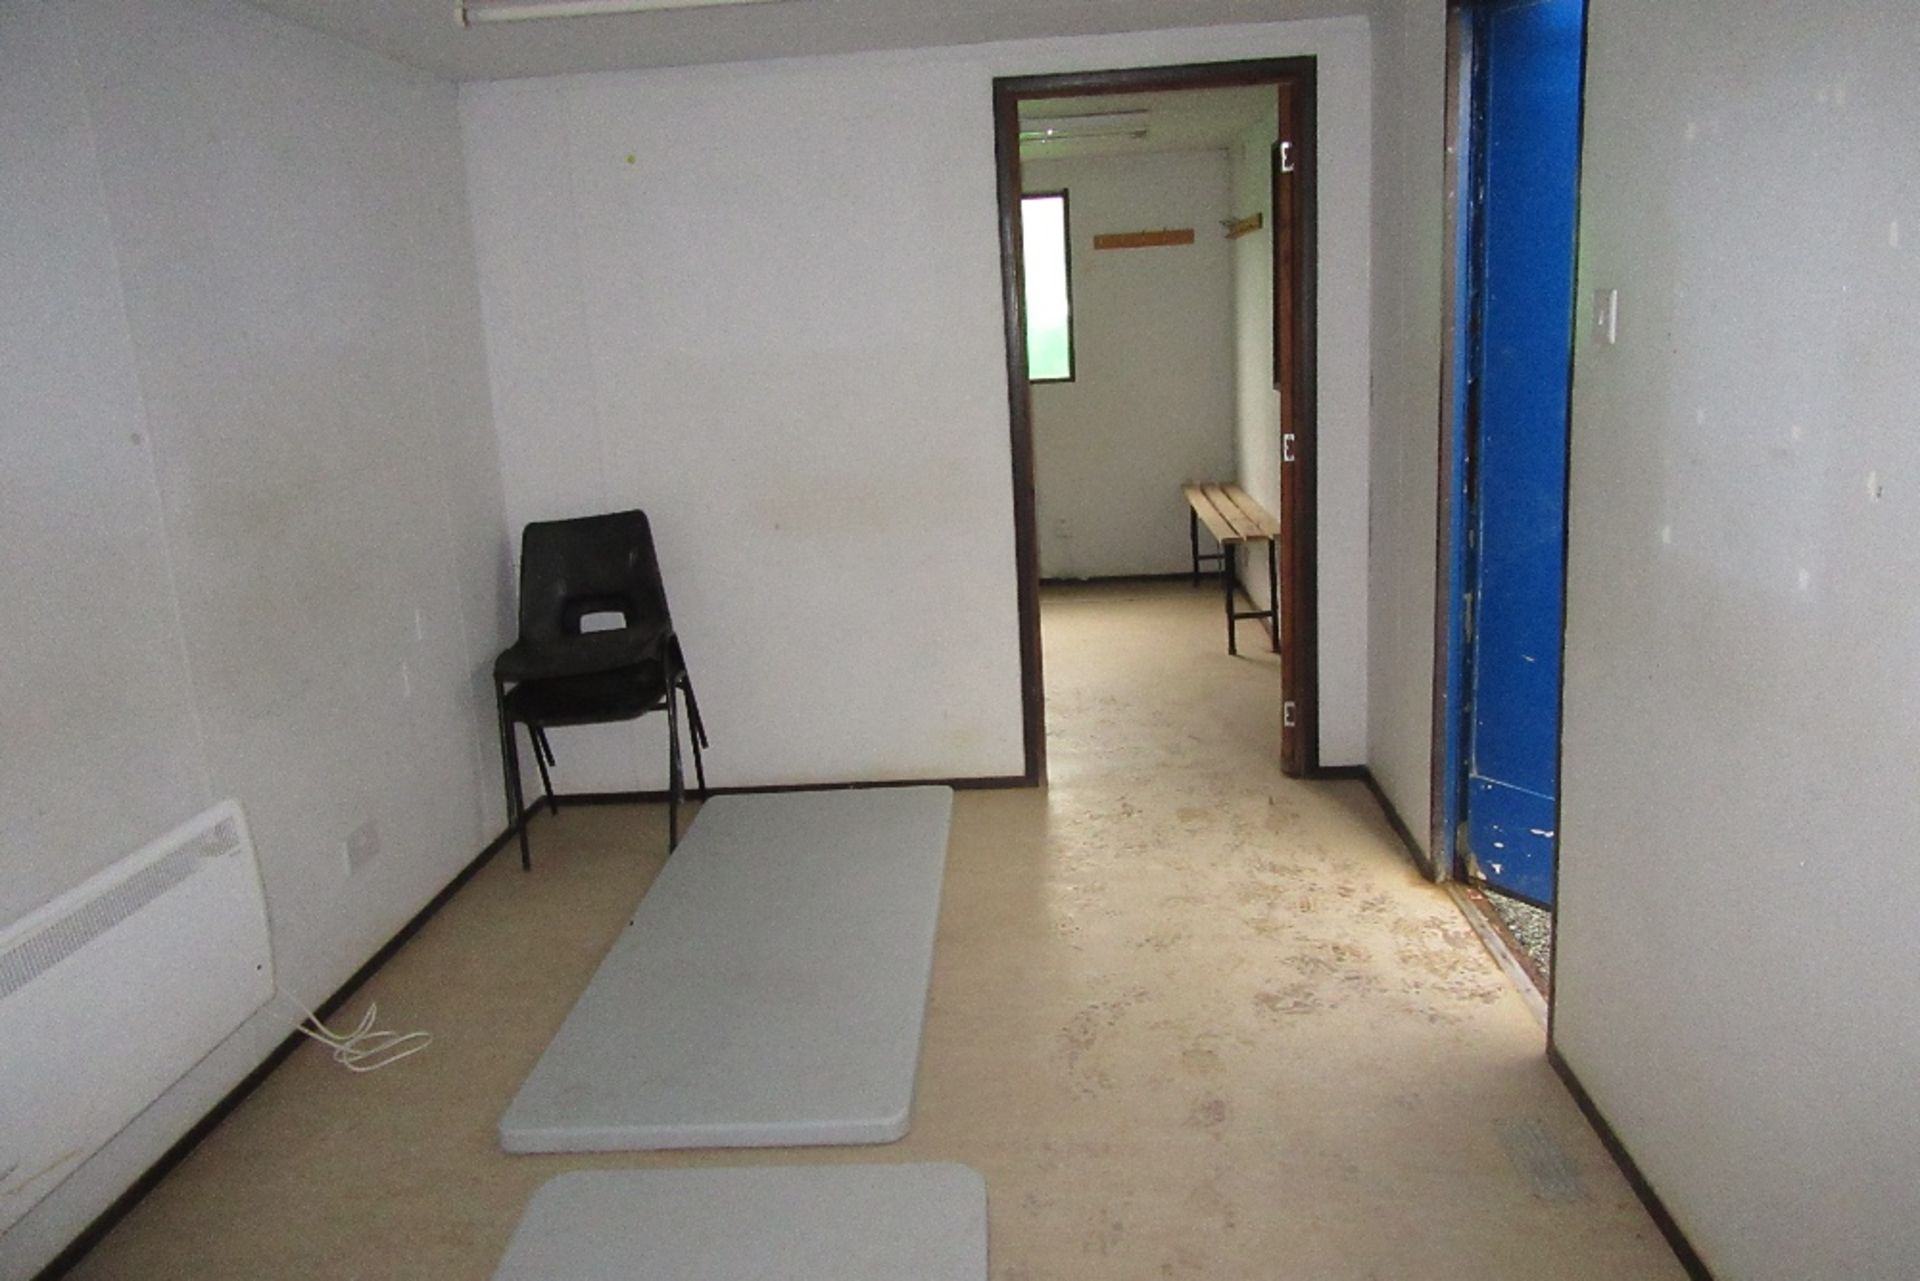 EC1199 30ft x 8ft Anti Vandal Canteen / Changing Room - Image 6 of 8